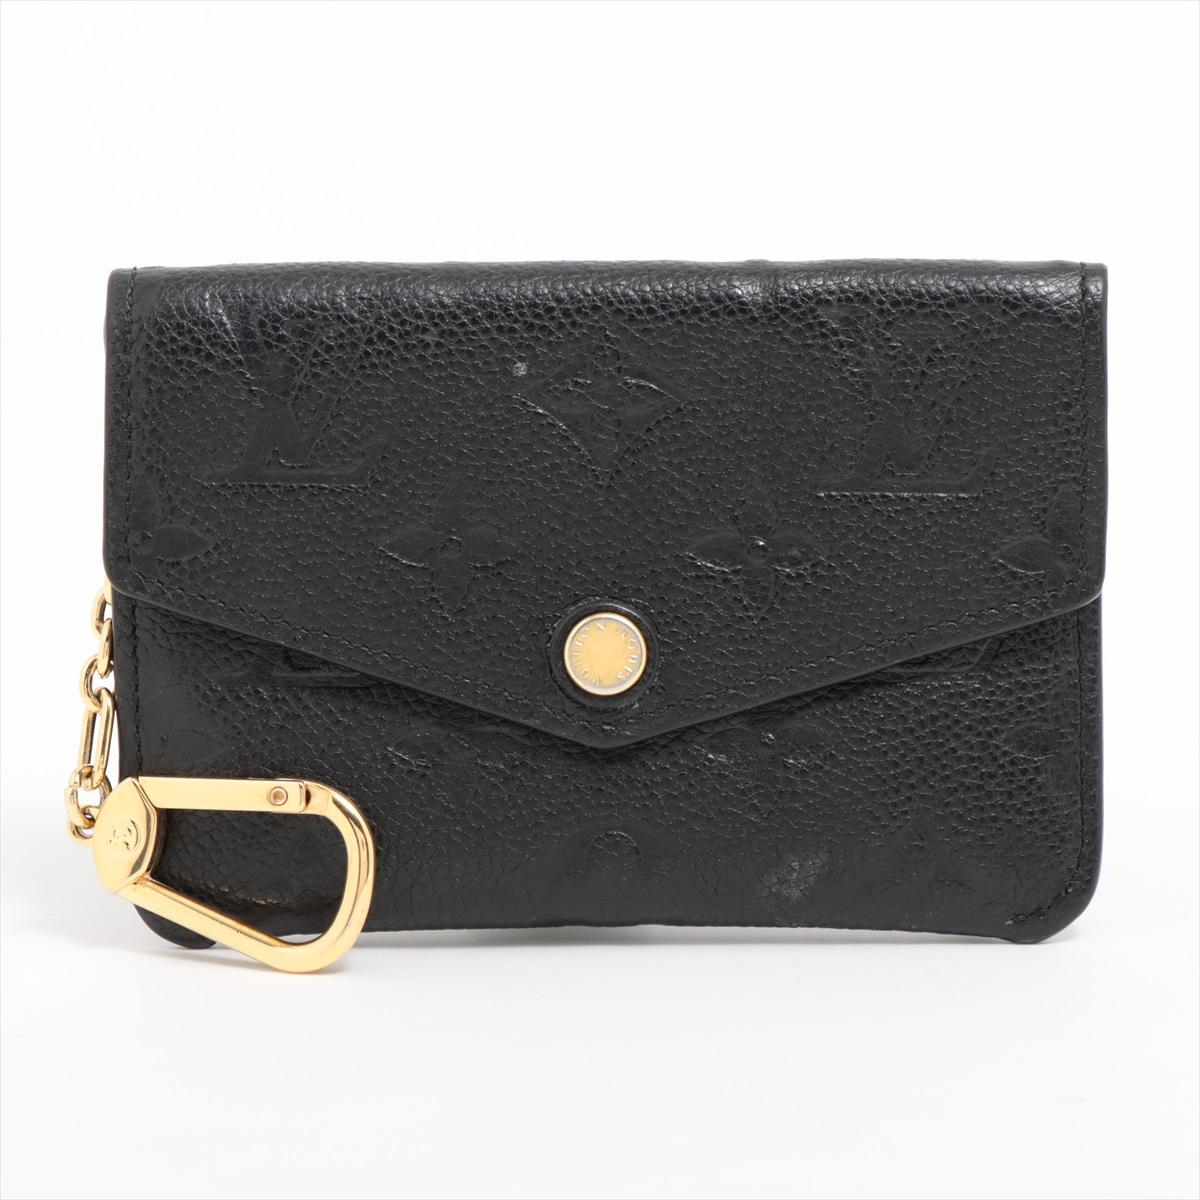 The Louis Vuitton Monogram Empreinte Pochette Cles Coin Case is a sleek and elegant accessory that combines style with practicality. The coin case features a compact and slim design, making it perfect for storing your coins, keys, or other small